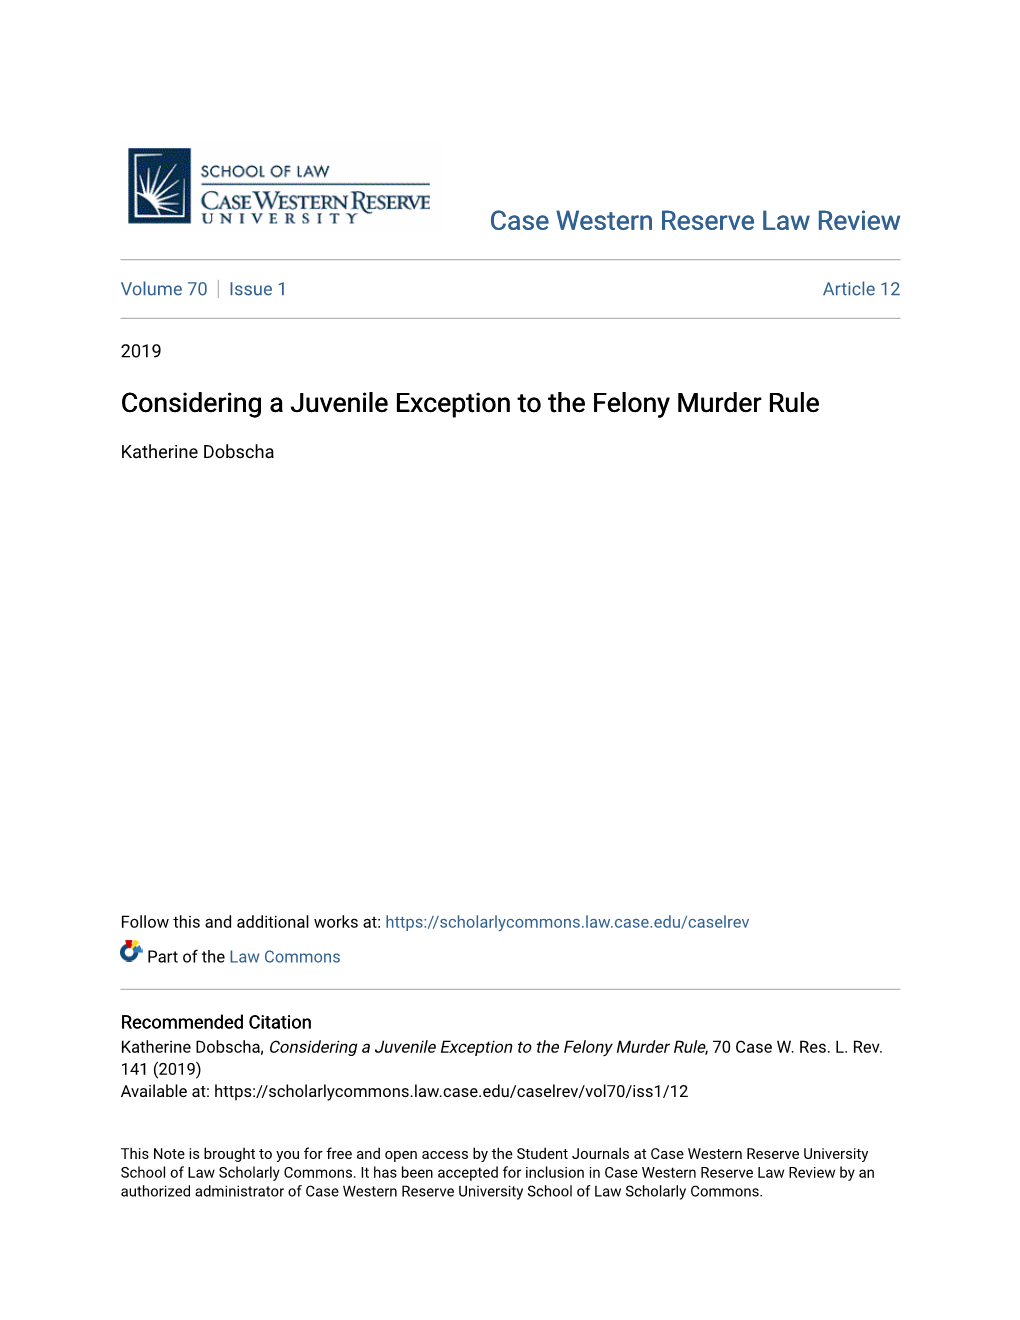 Considering a Juvenile Exception to the Felony Murder Rule